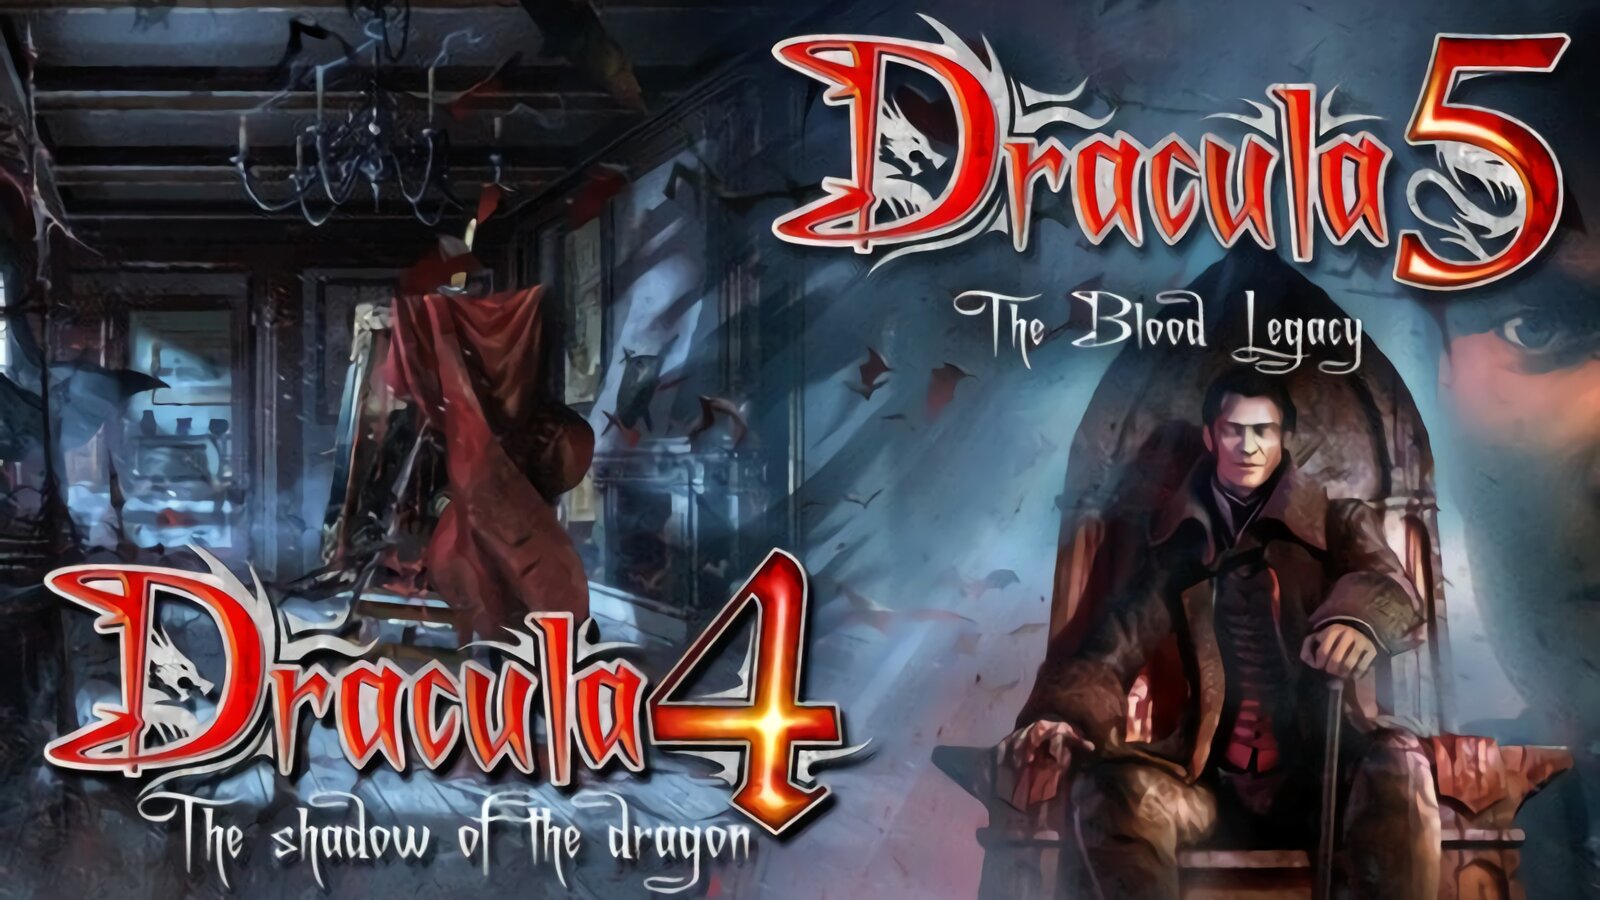 Dracula 4 and 5 - Special Steam Edition